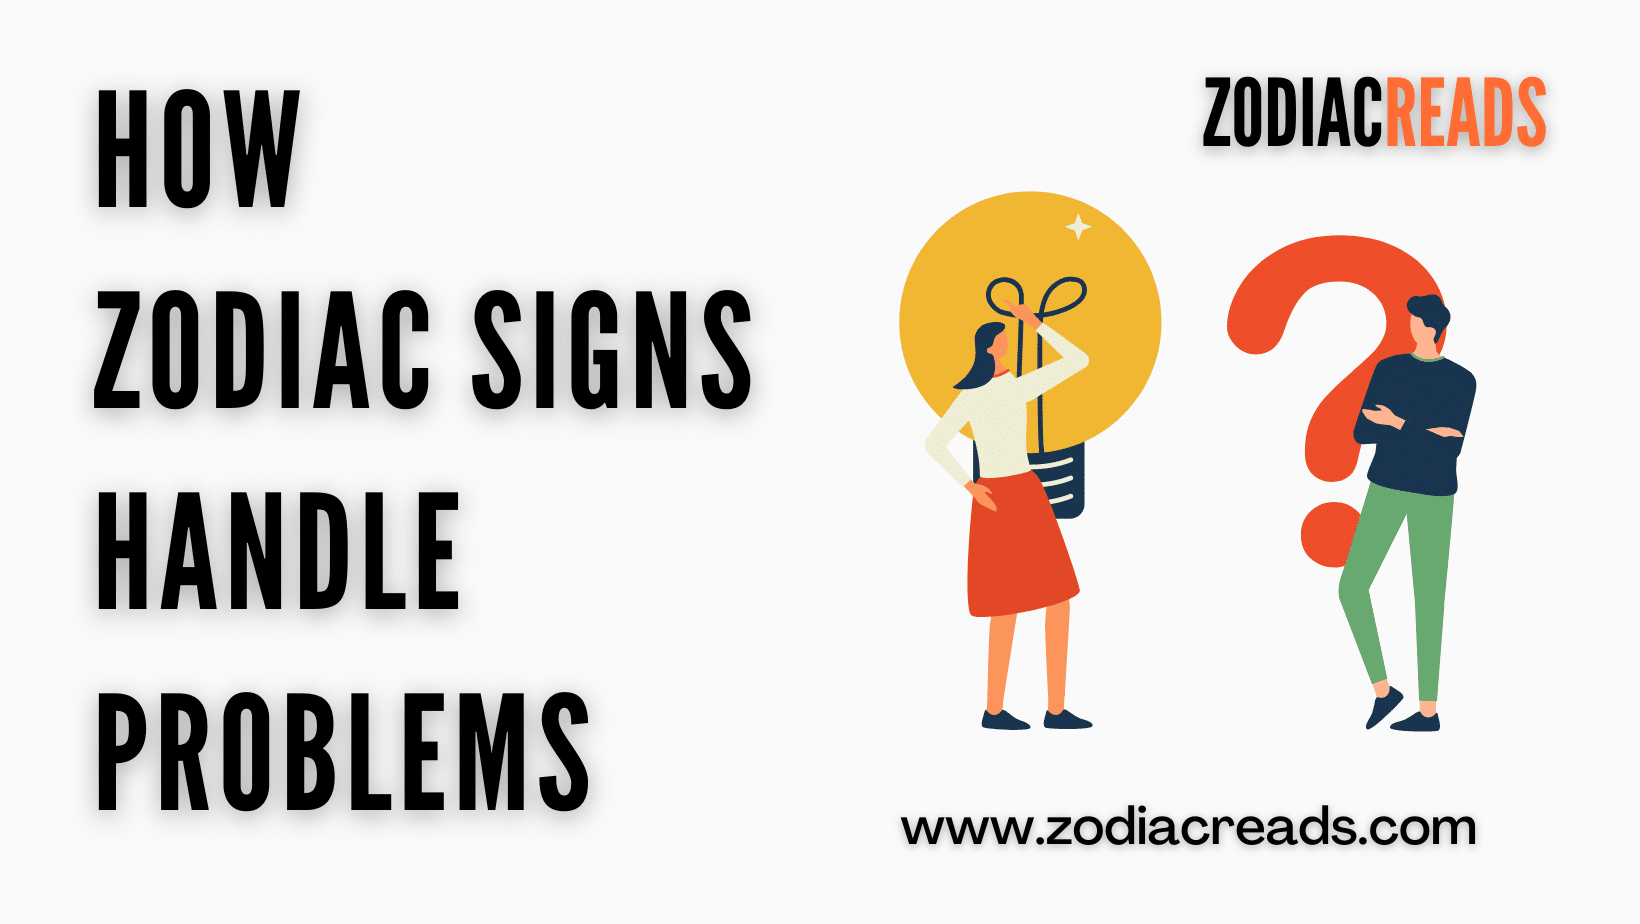 HOW Zodiac SIGNS HANDLE PROBLEMS